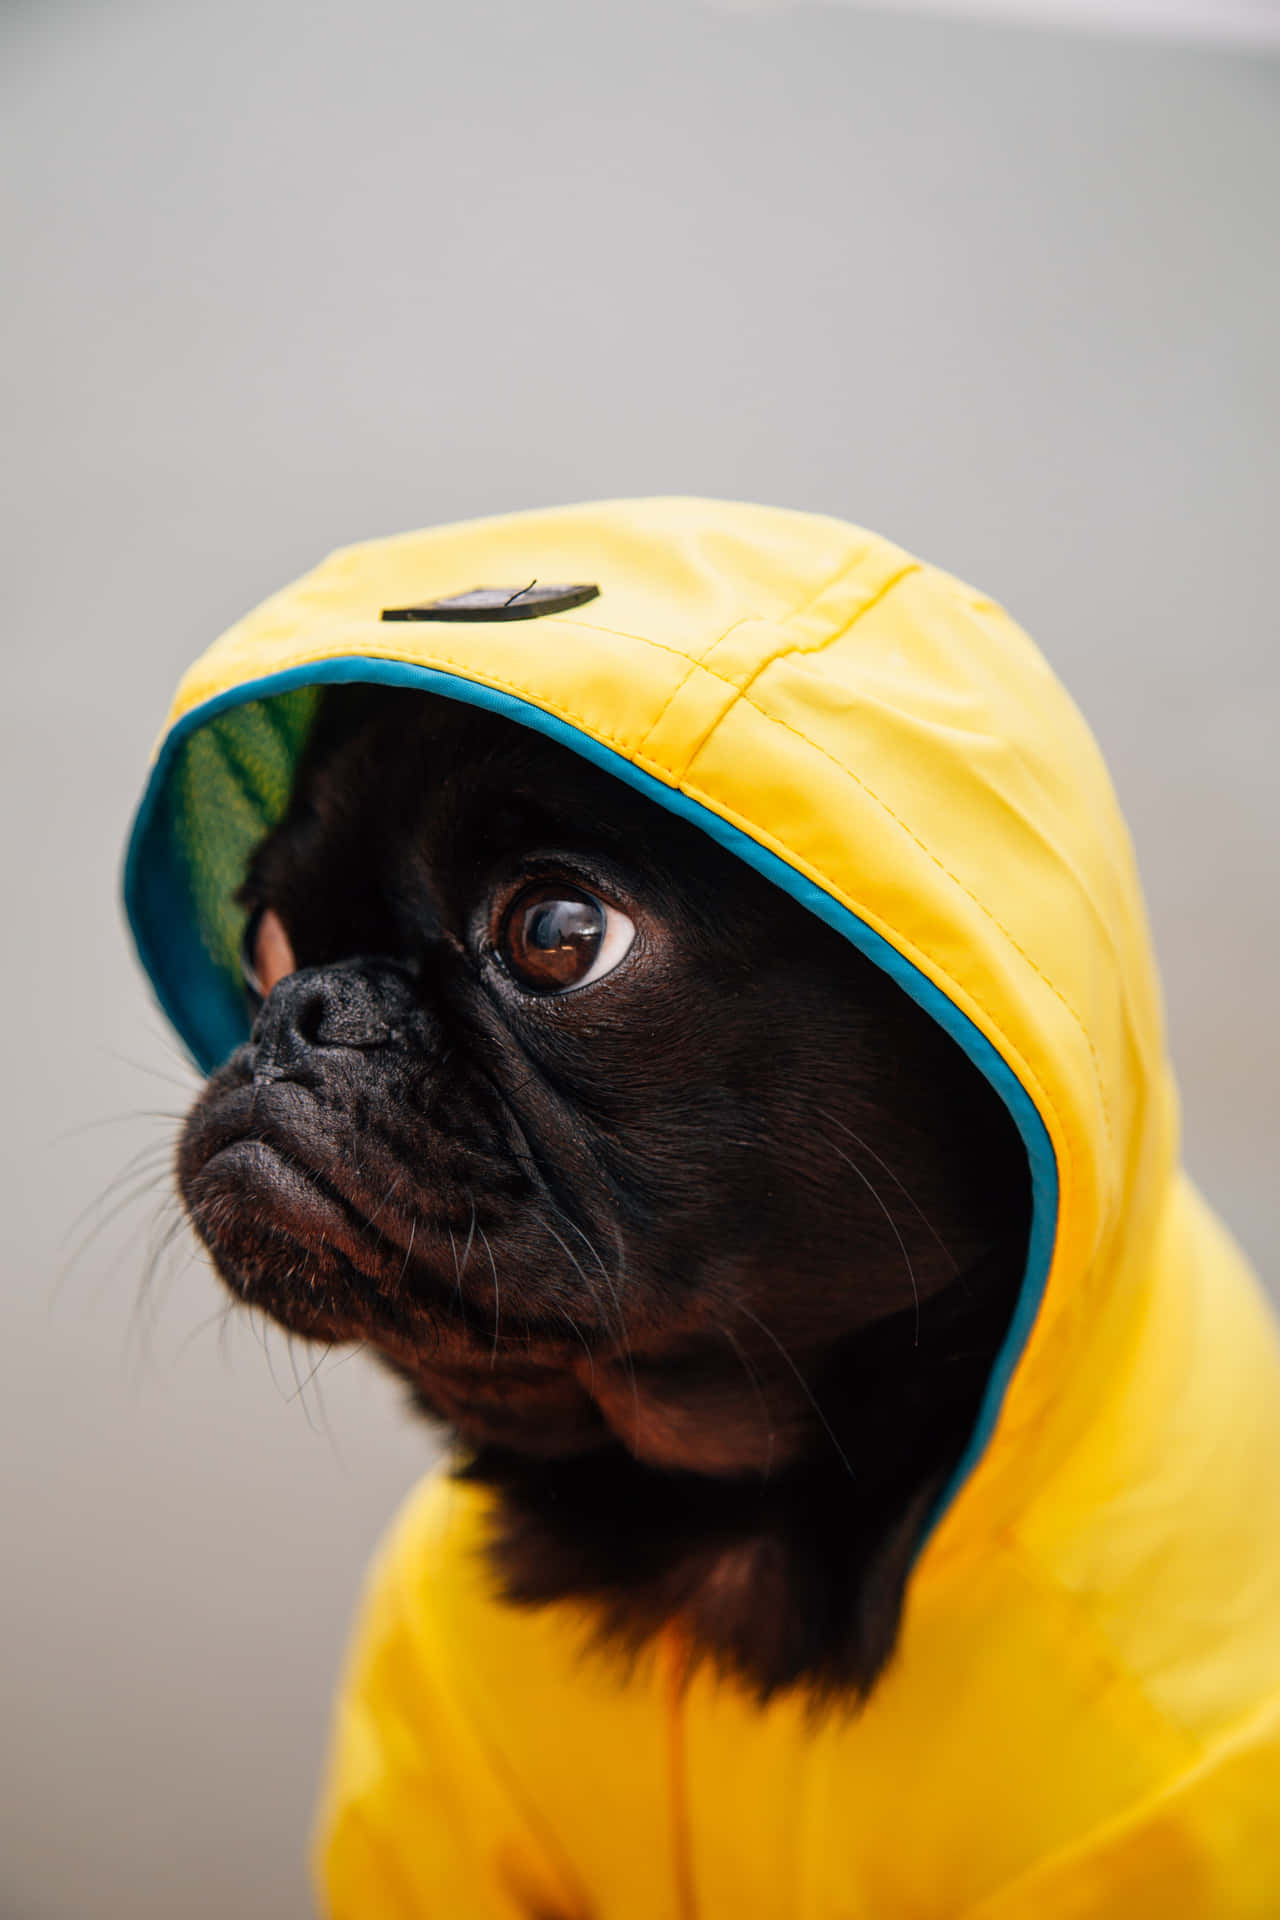 A person in a yellow raincoat on a rainy day Wallpaper